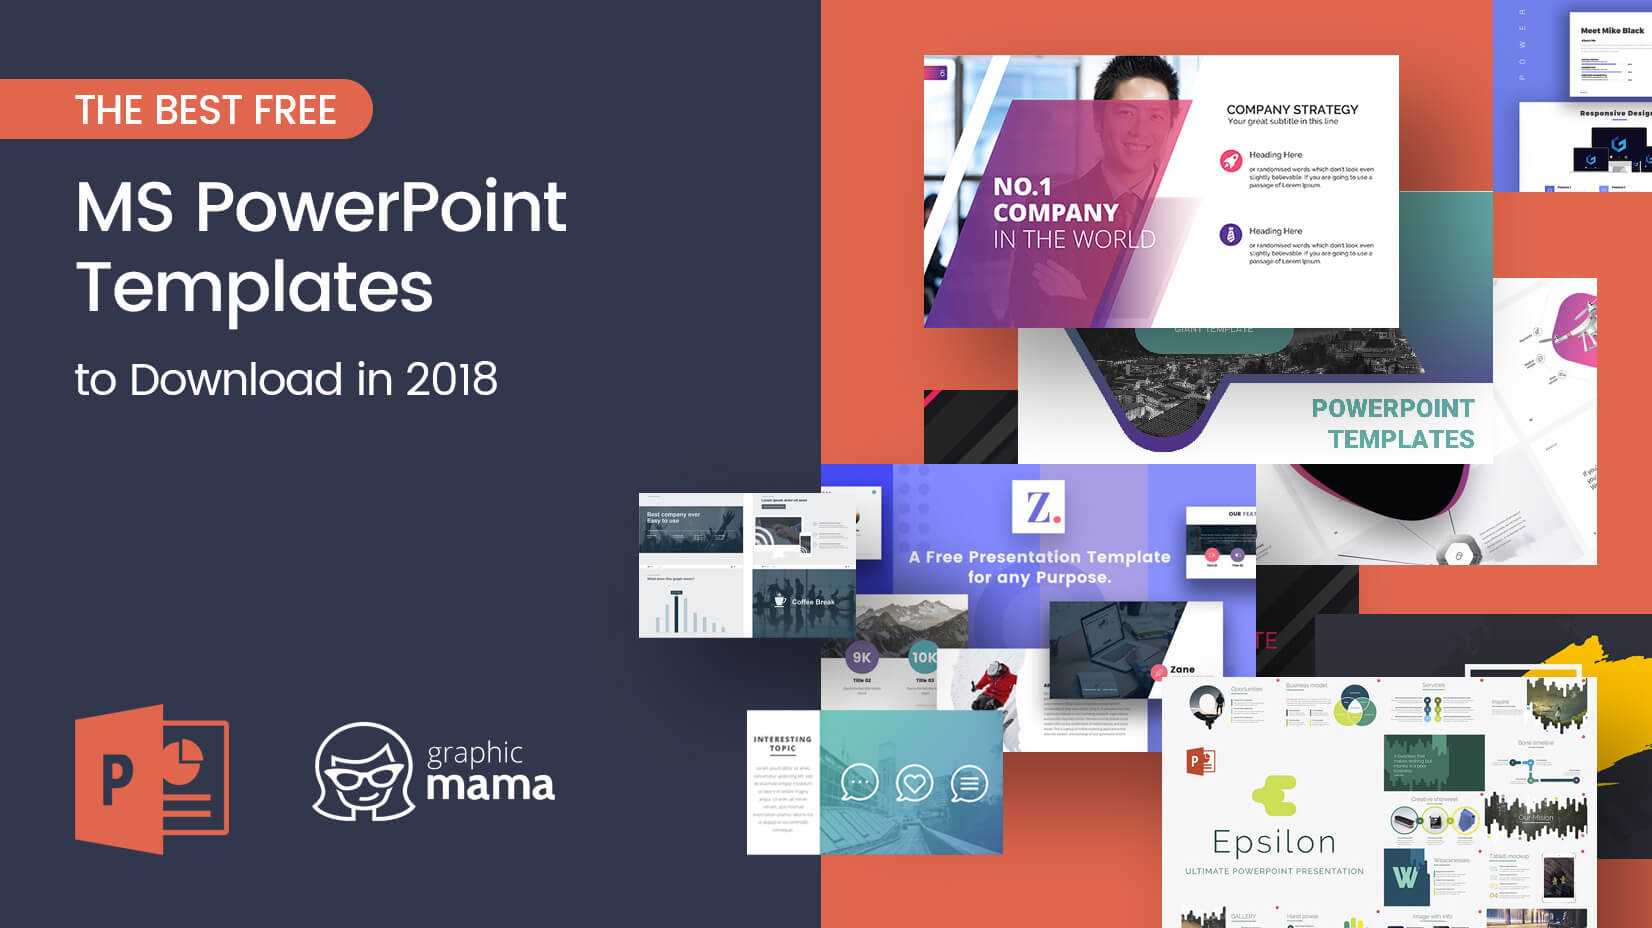 The Best Free Powerpoint Templates To Download In 2018 Throughout Powerpoint Slides Design Templates For Free